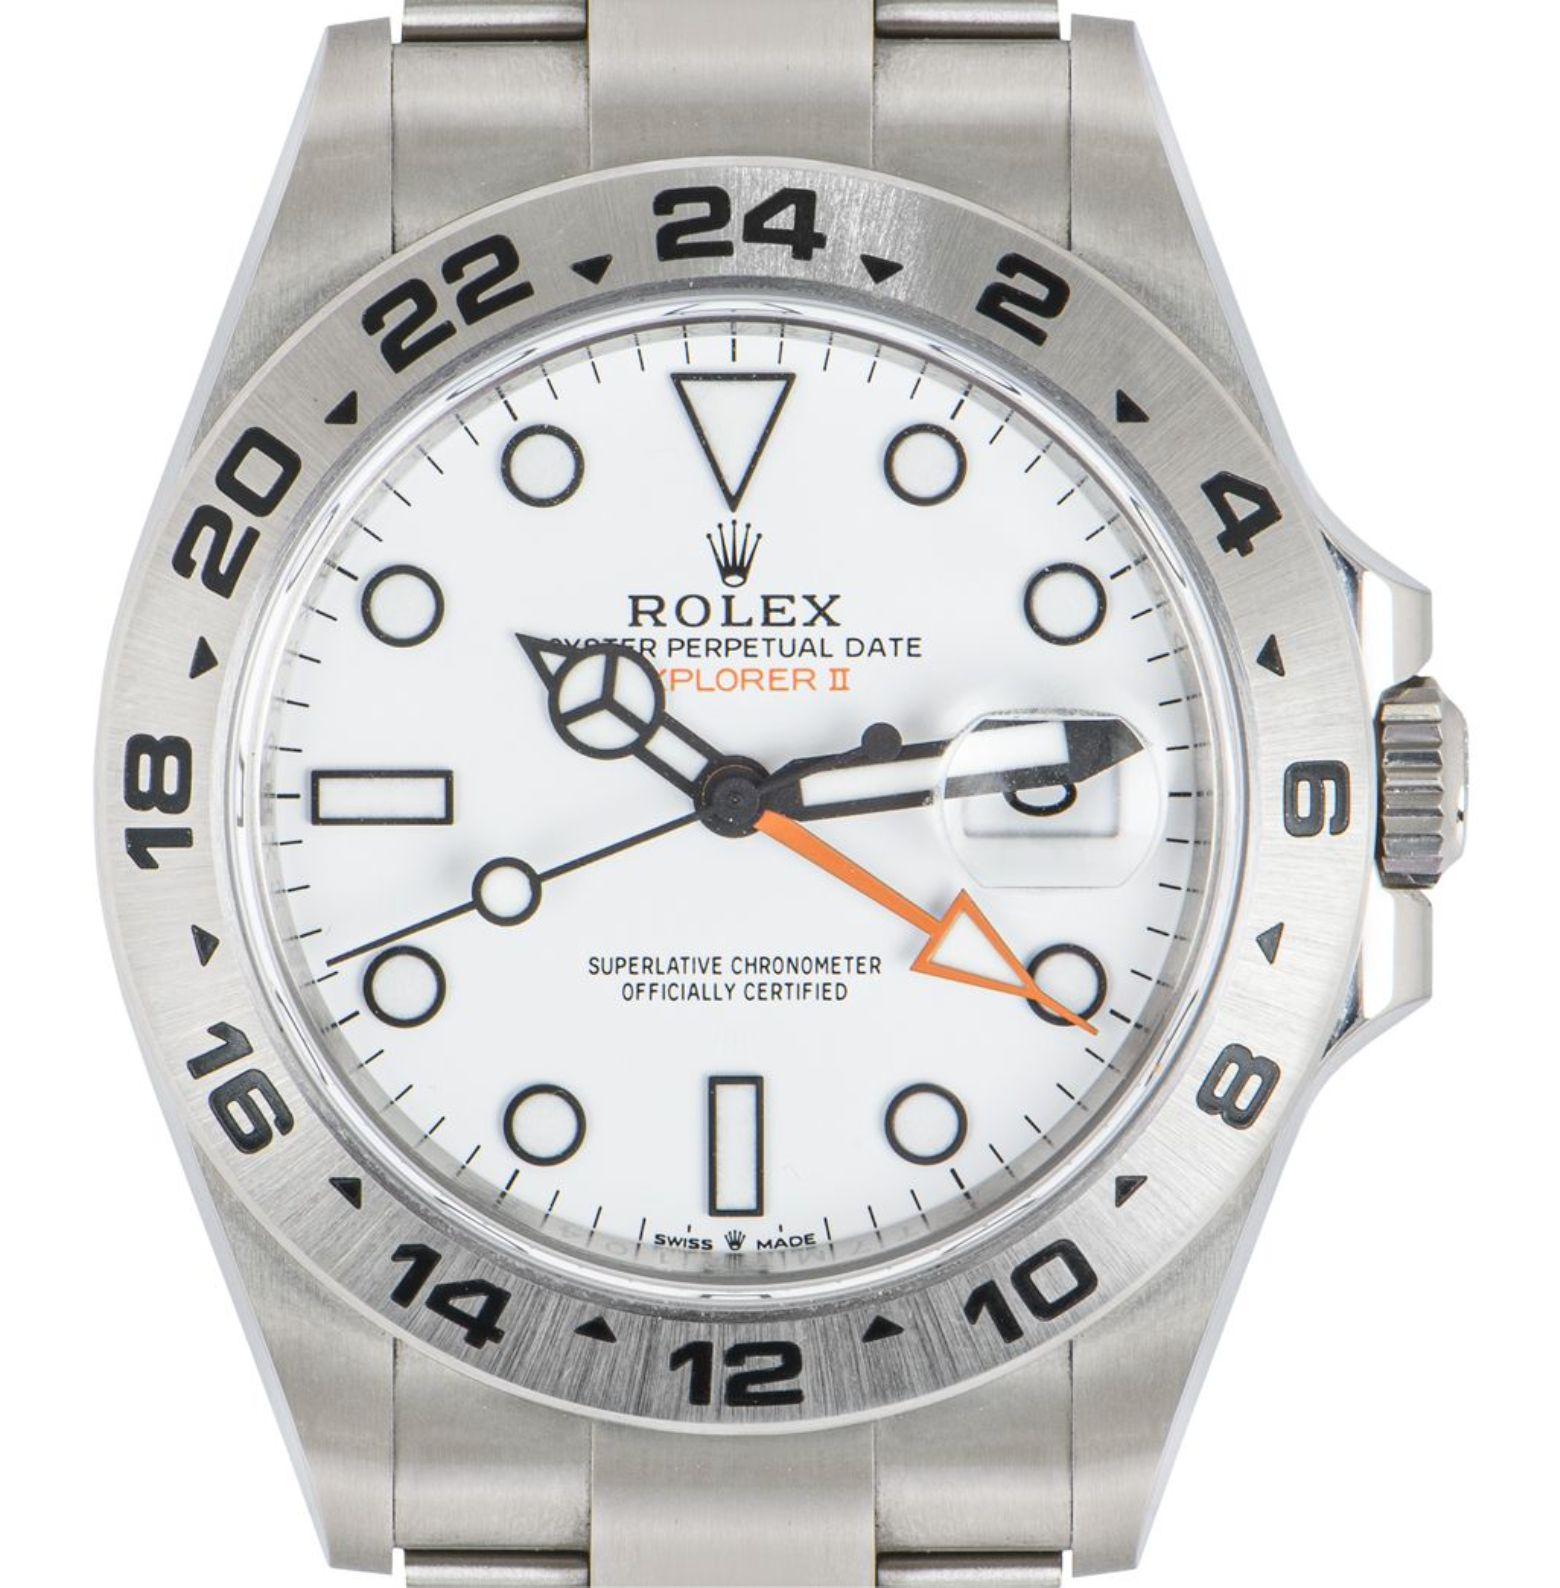 A 42mm Explorer II in Oystersteel by Rolex. Featuring a white dial with the date and an orange arrow-shaped 24-hour hand. A fixed stainless steel 24-hour bezel also features.

The Oyster bracelet comes with a folding Oysterlock clasp which is